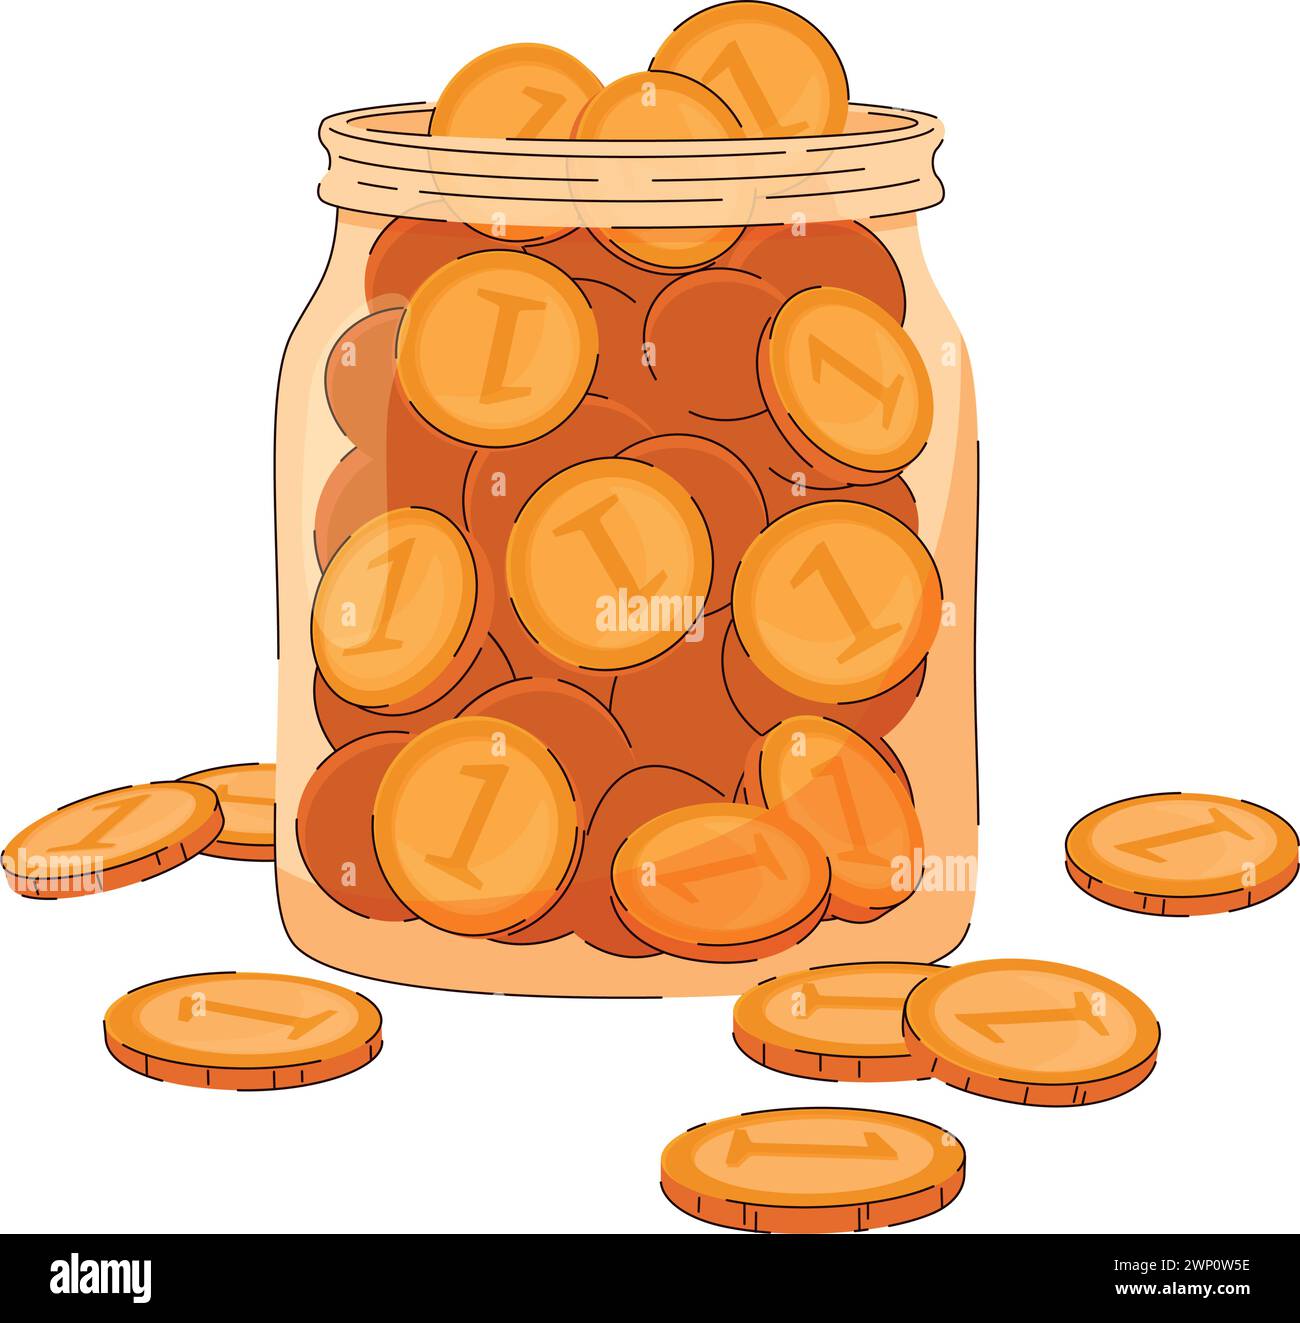 A glass jar completely filled with coins. Concept financial literacy, savings, bank deposits, tips, donation. Stock Vector